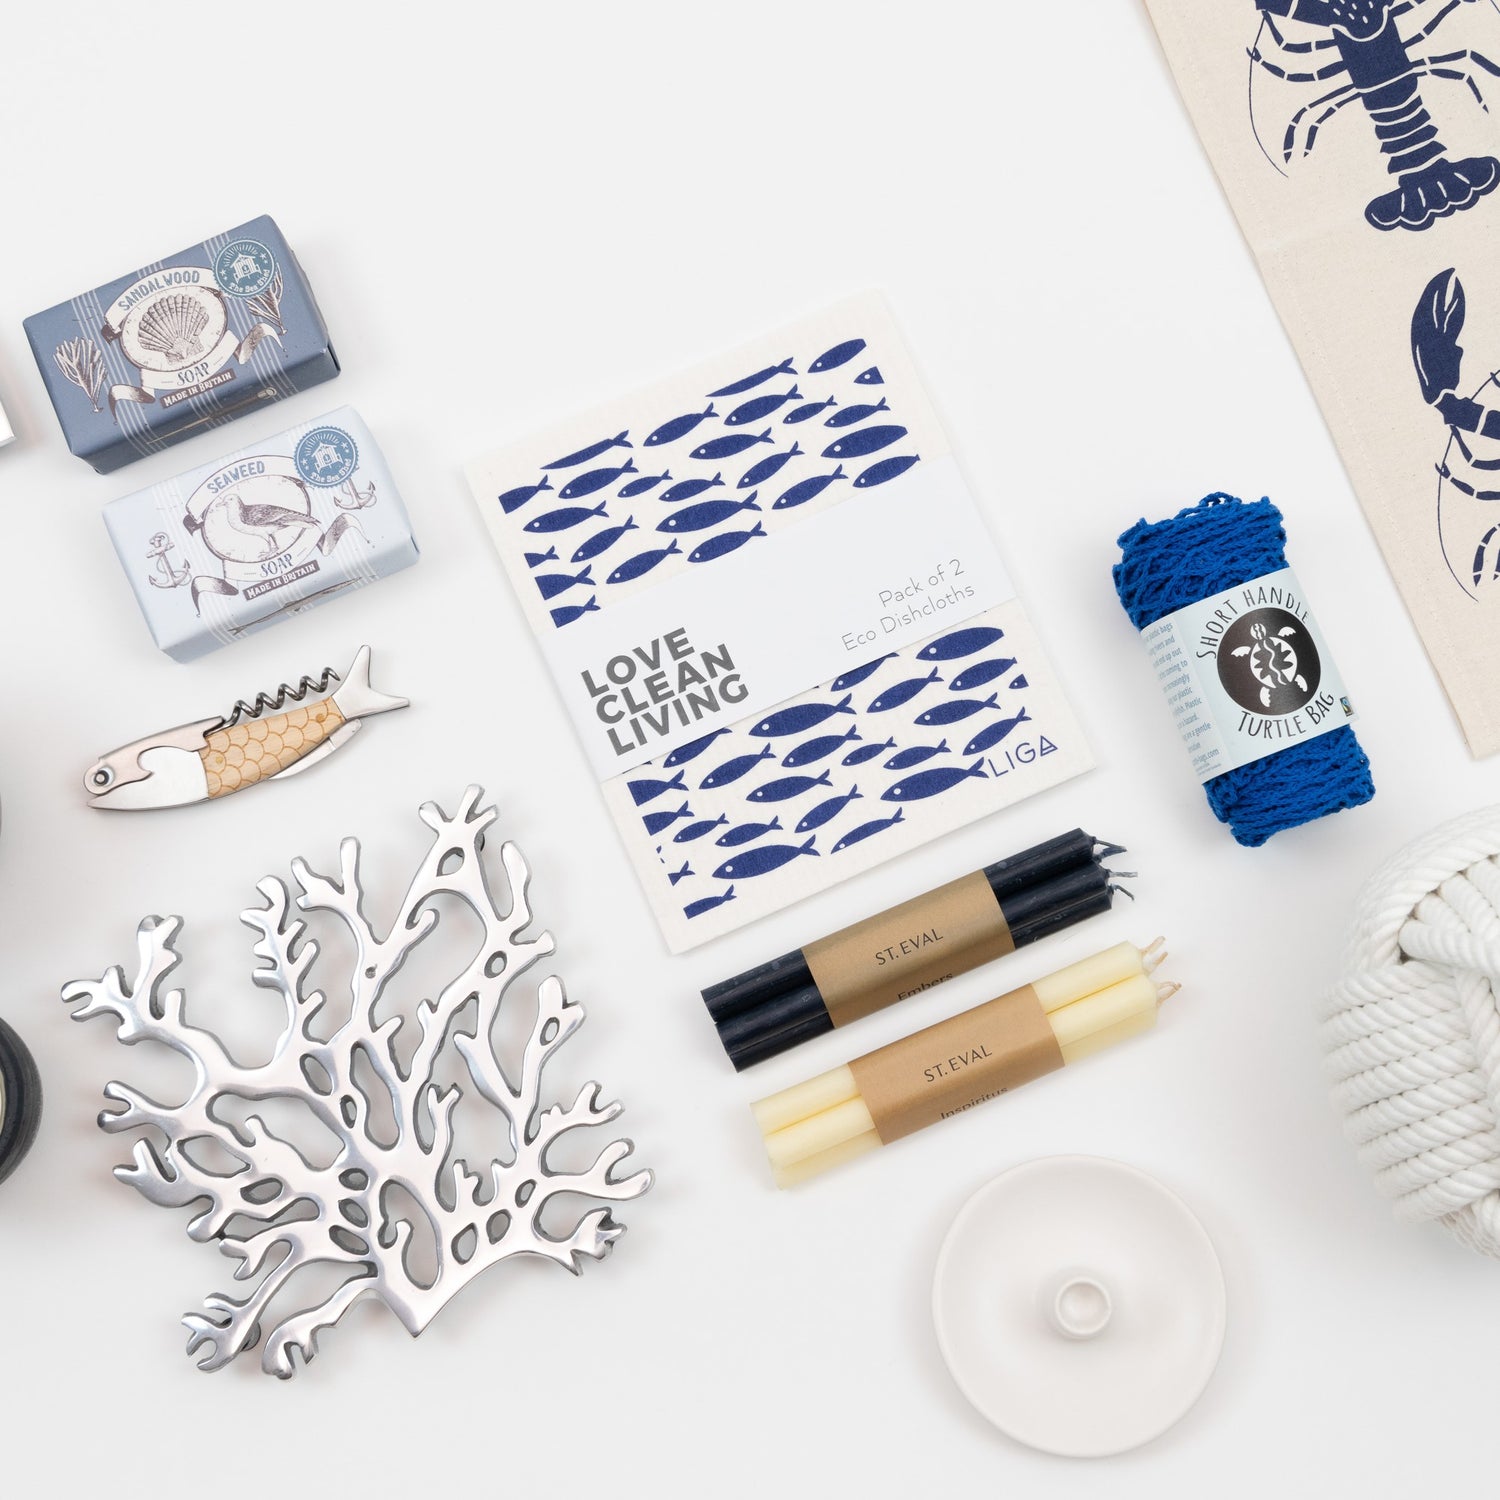 A collection of maritime-themed homeware items arranged on a white table, featuring a tea towel, dish cloth, candles, and soap.